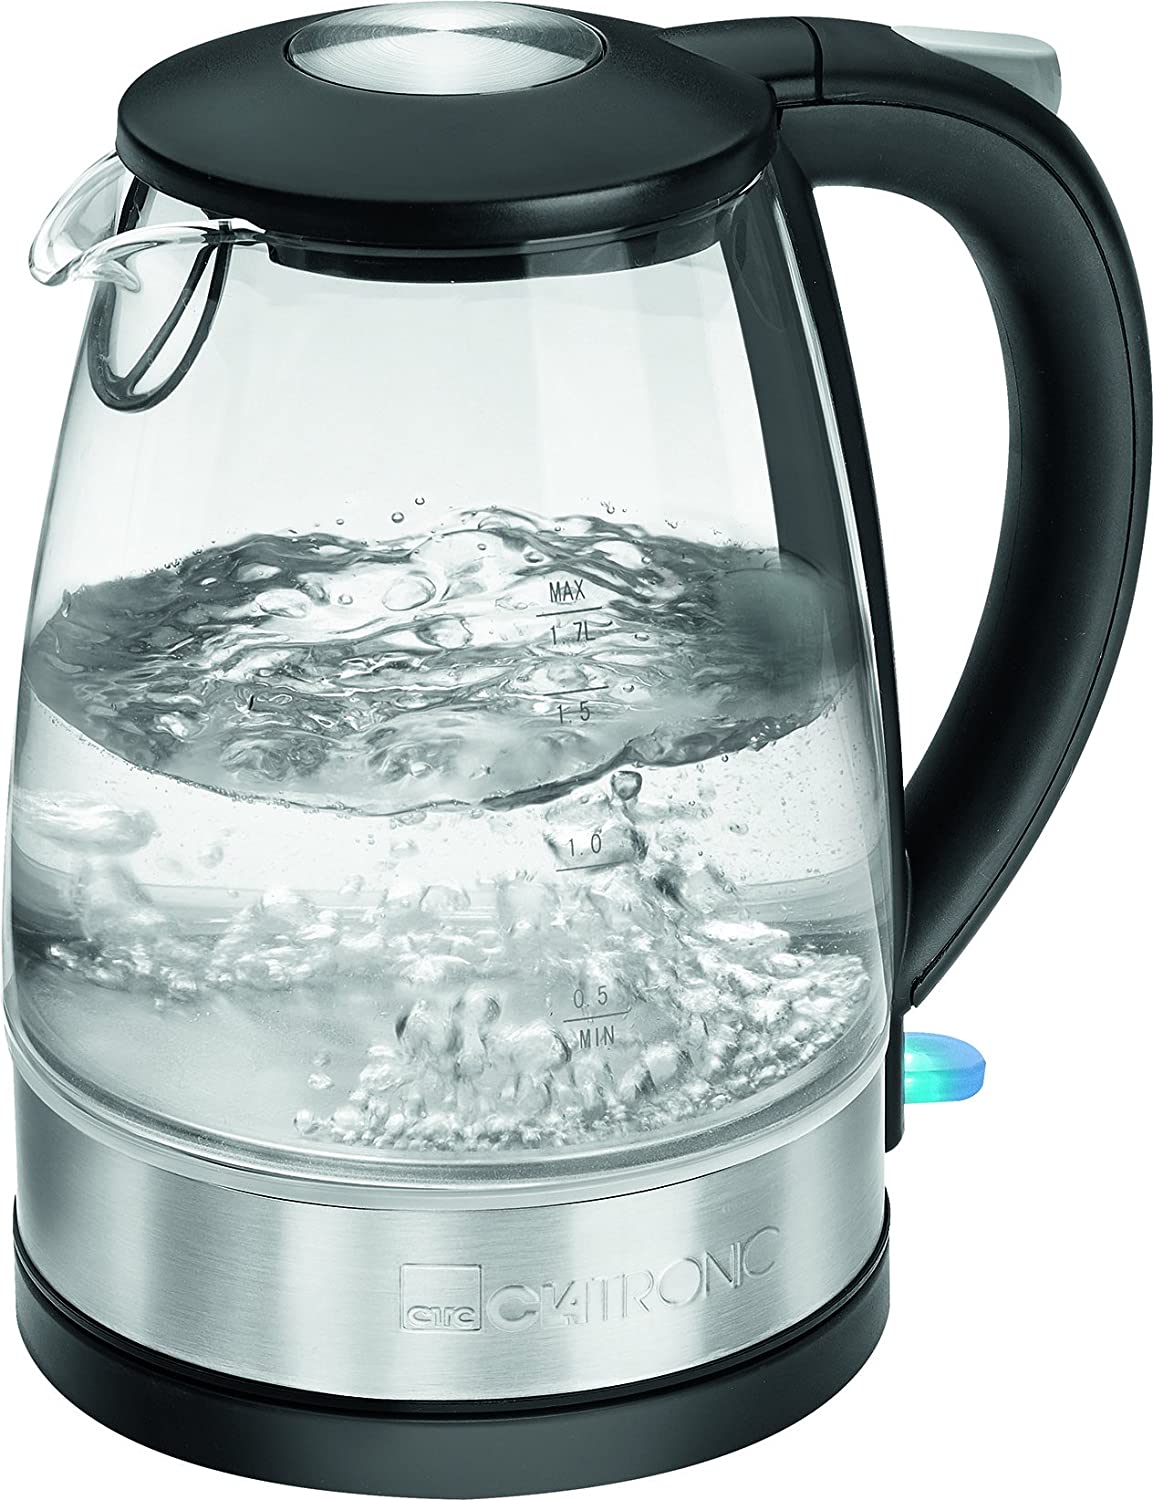 Clatronic WKS 3680 G Glass Stainless Steel Kettle 1.7 L Concealed Stainless Steel Heating Element External Water Level Indicator